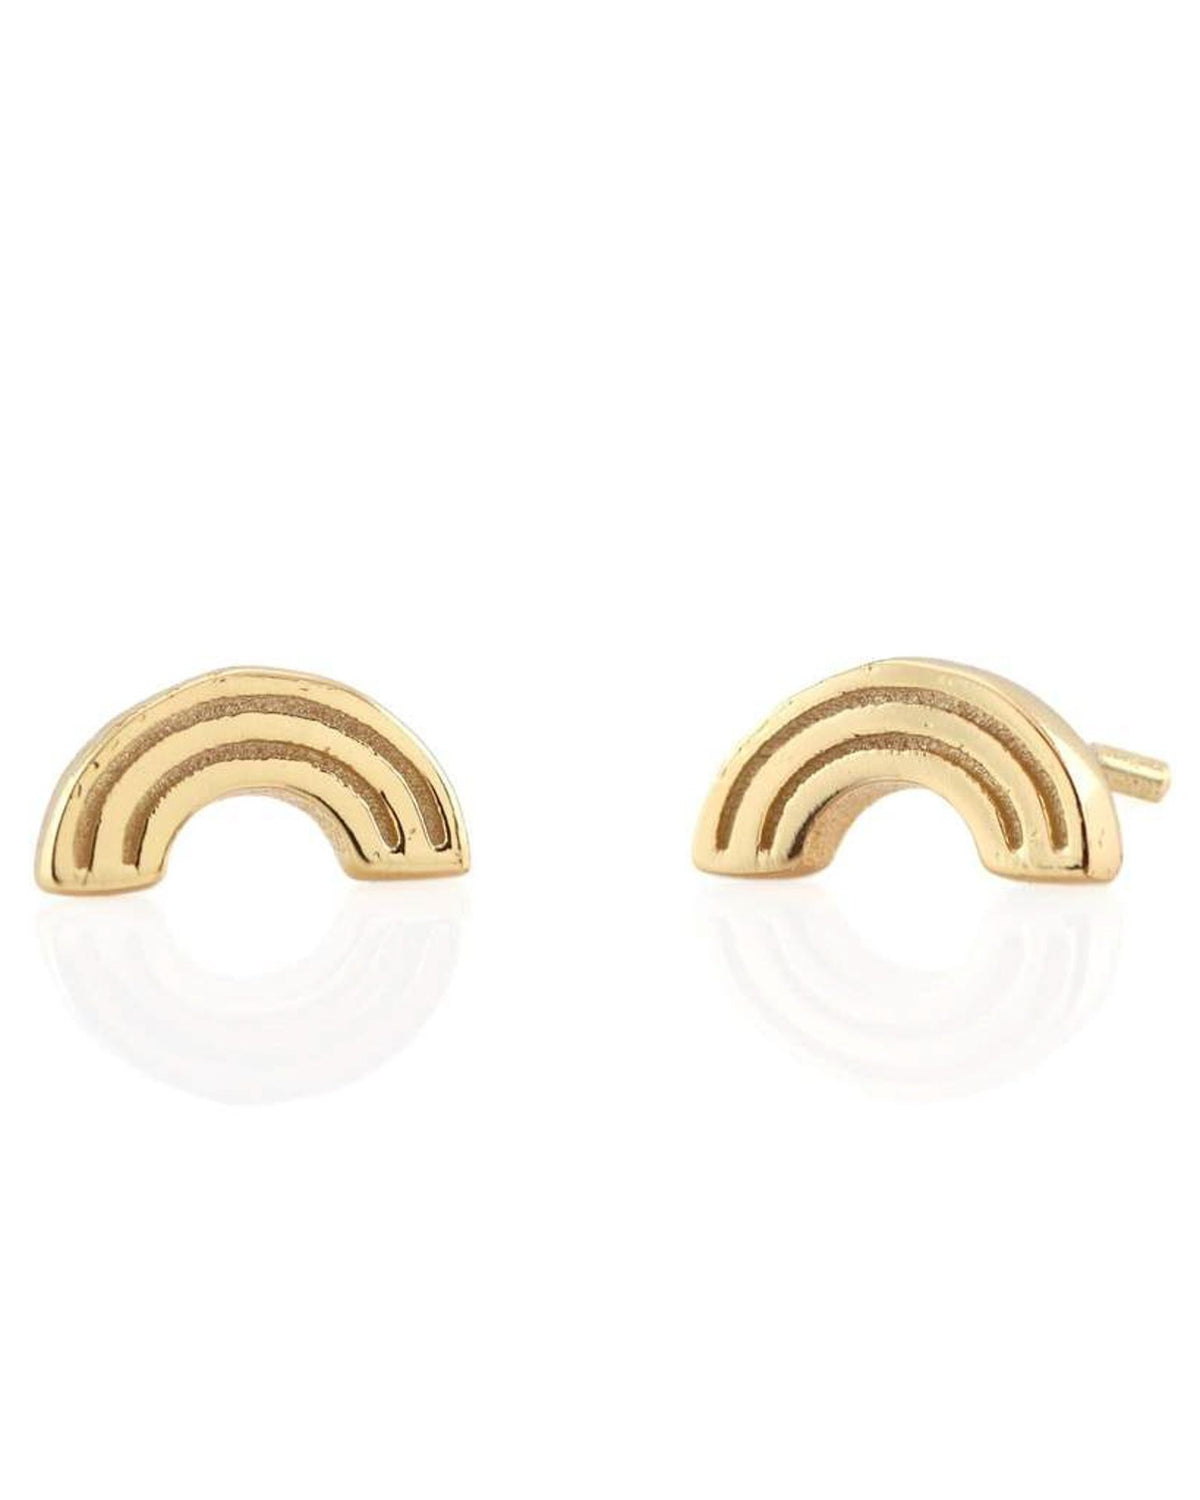 Kris Nations Rainbow Studs in Gold